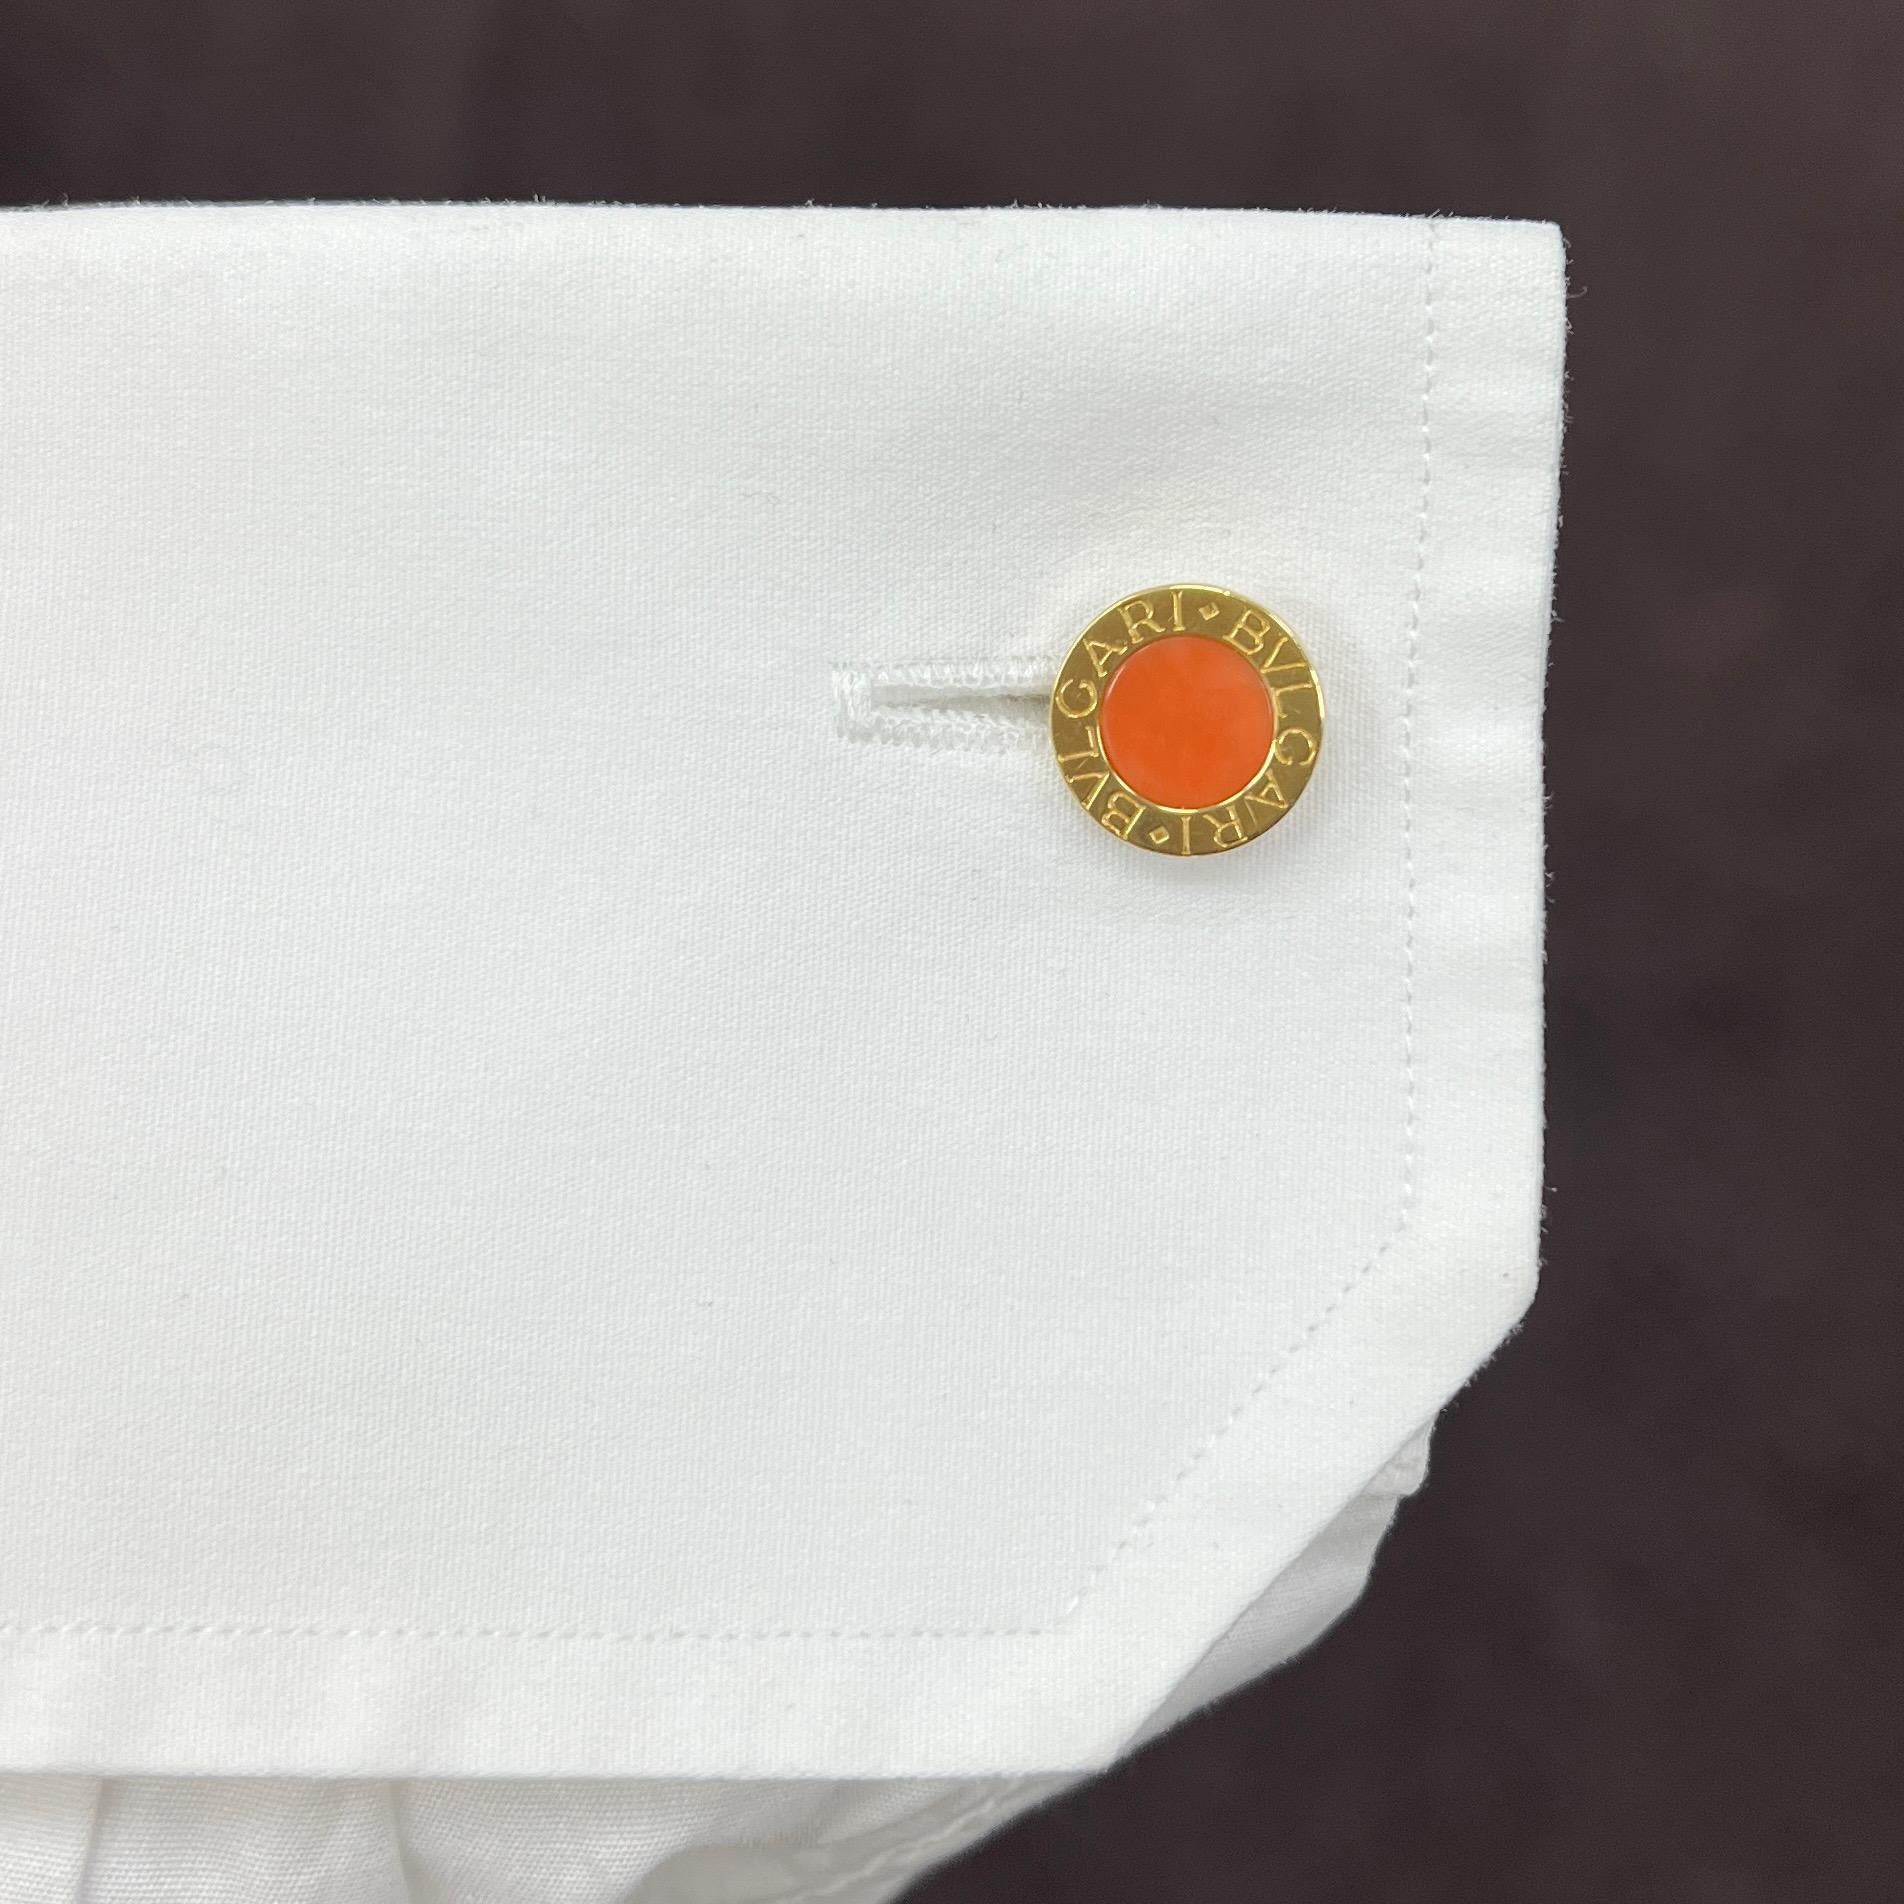 Bvlgari Bvlgari Coral Gold Cufflinks In Excellent Condition For Sale In New York, NY